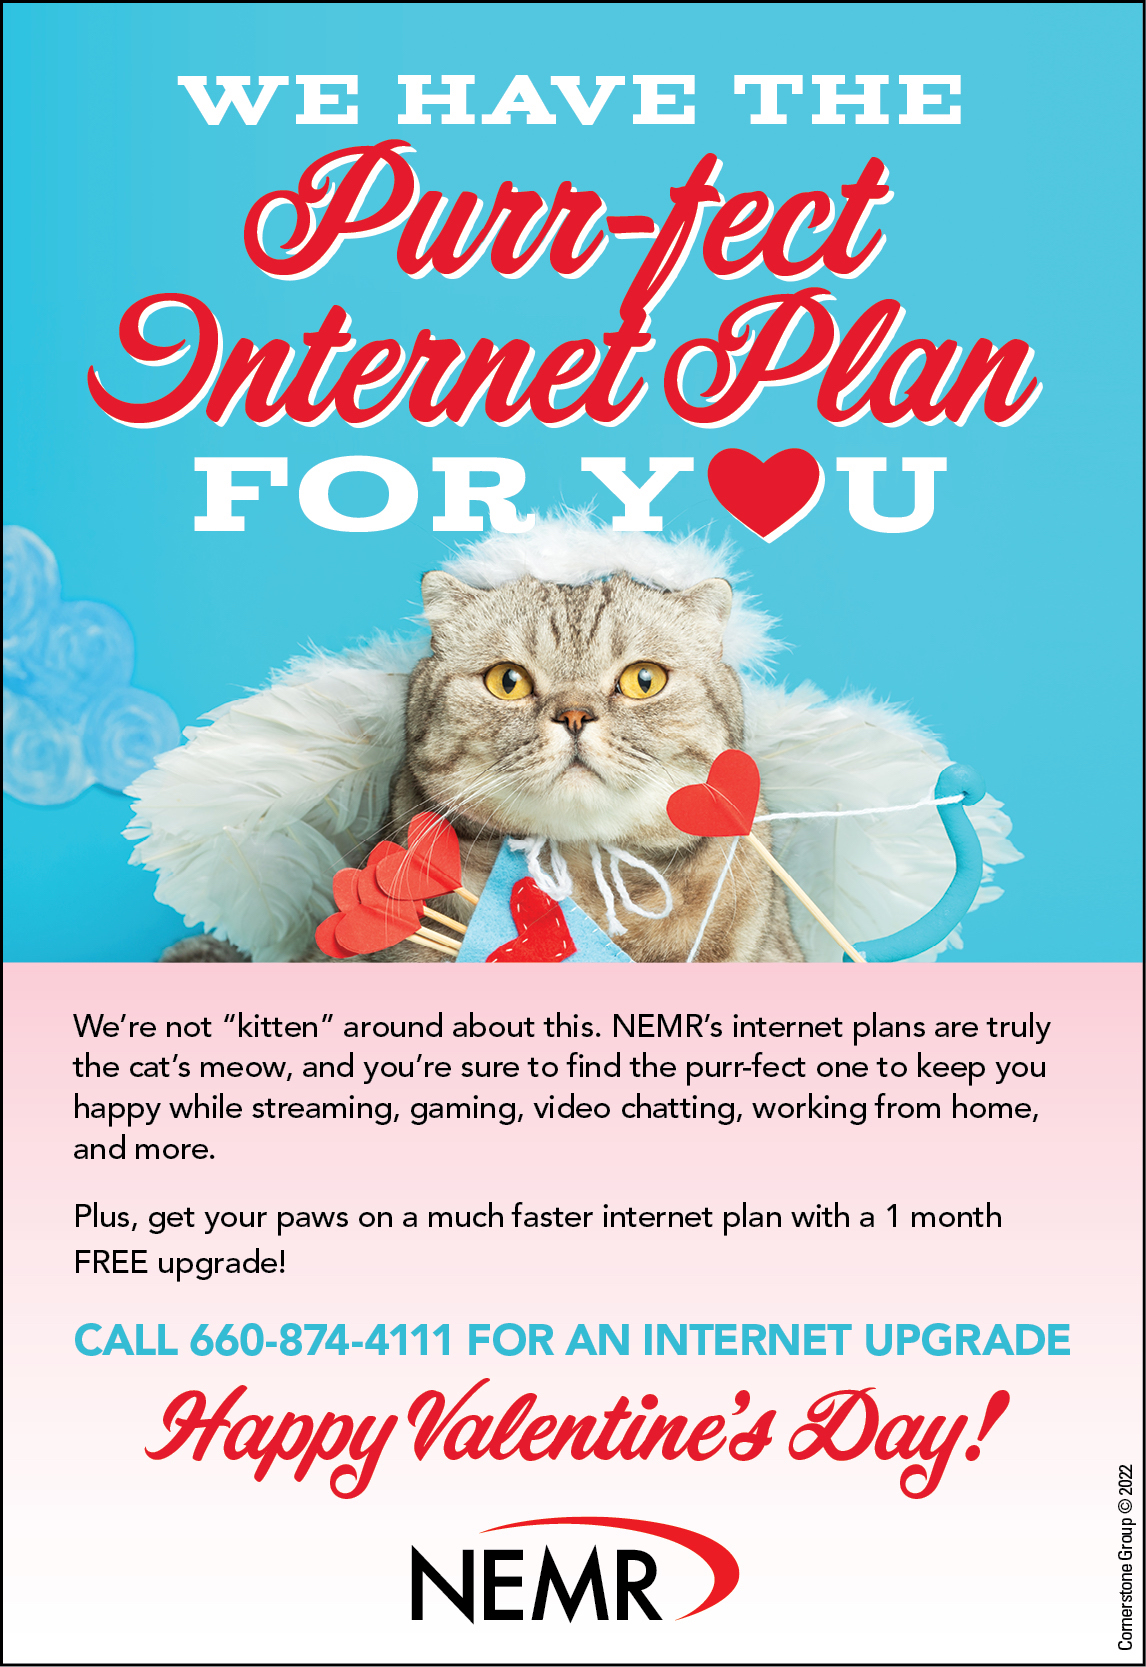 The Purr-fect Internet Plan - Download Graphics to View